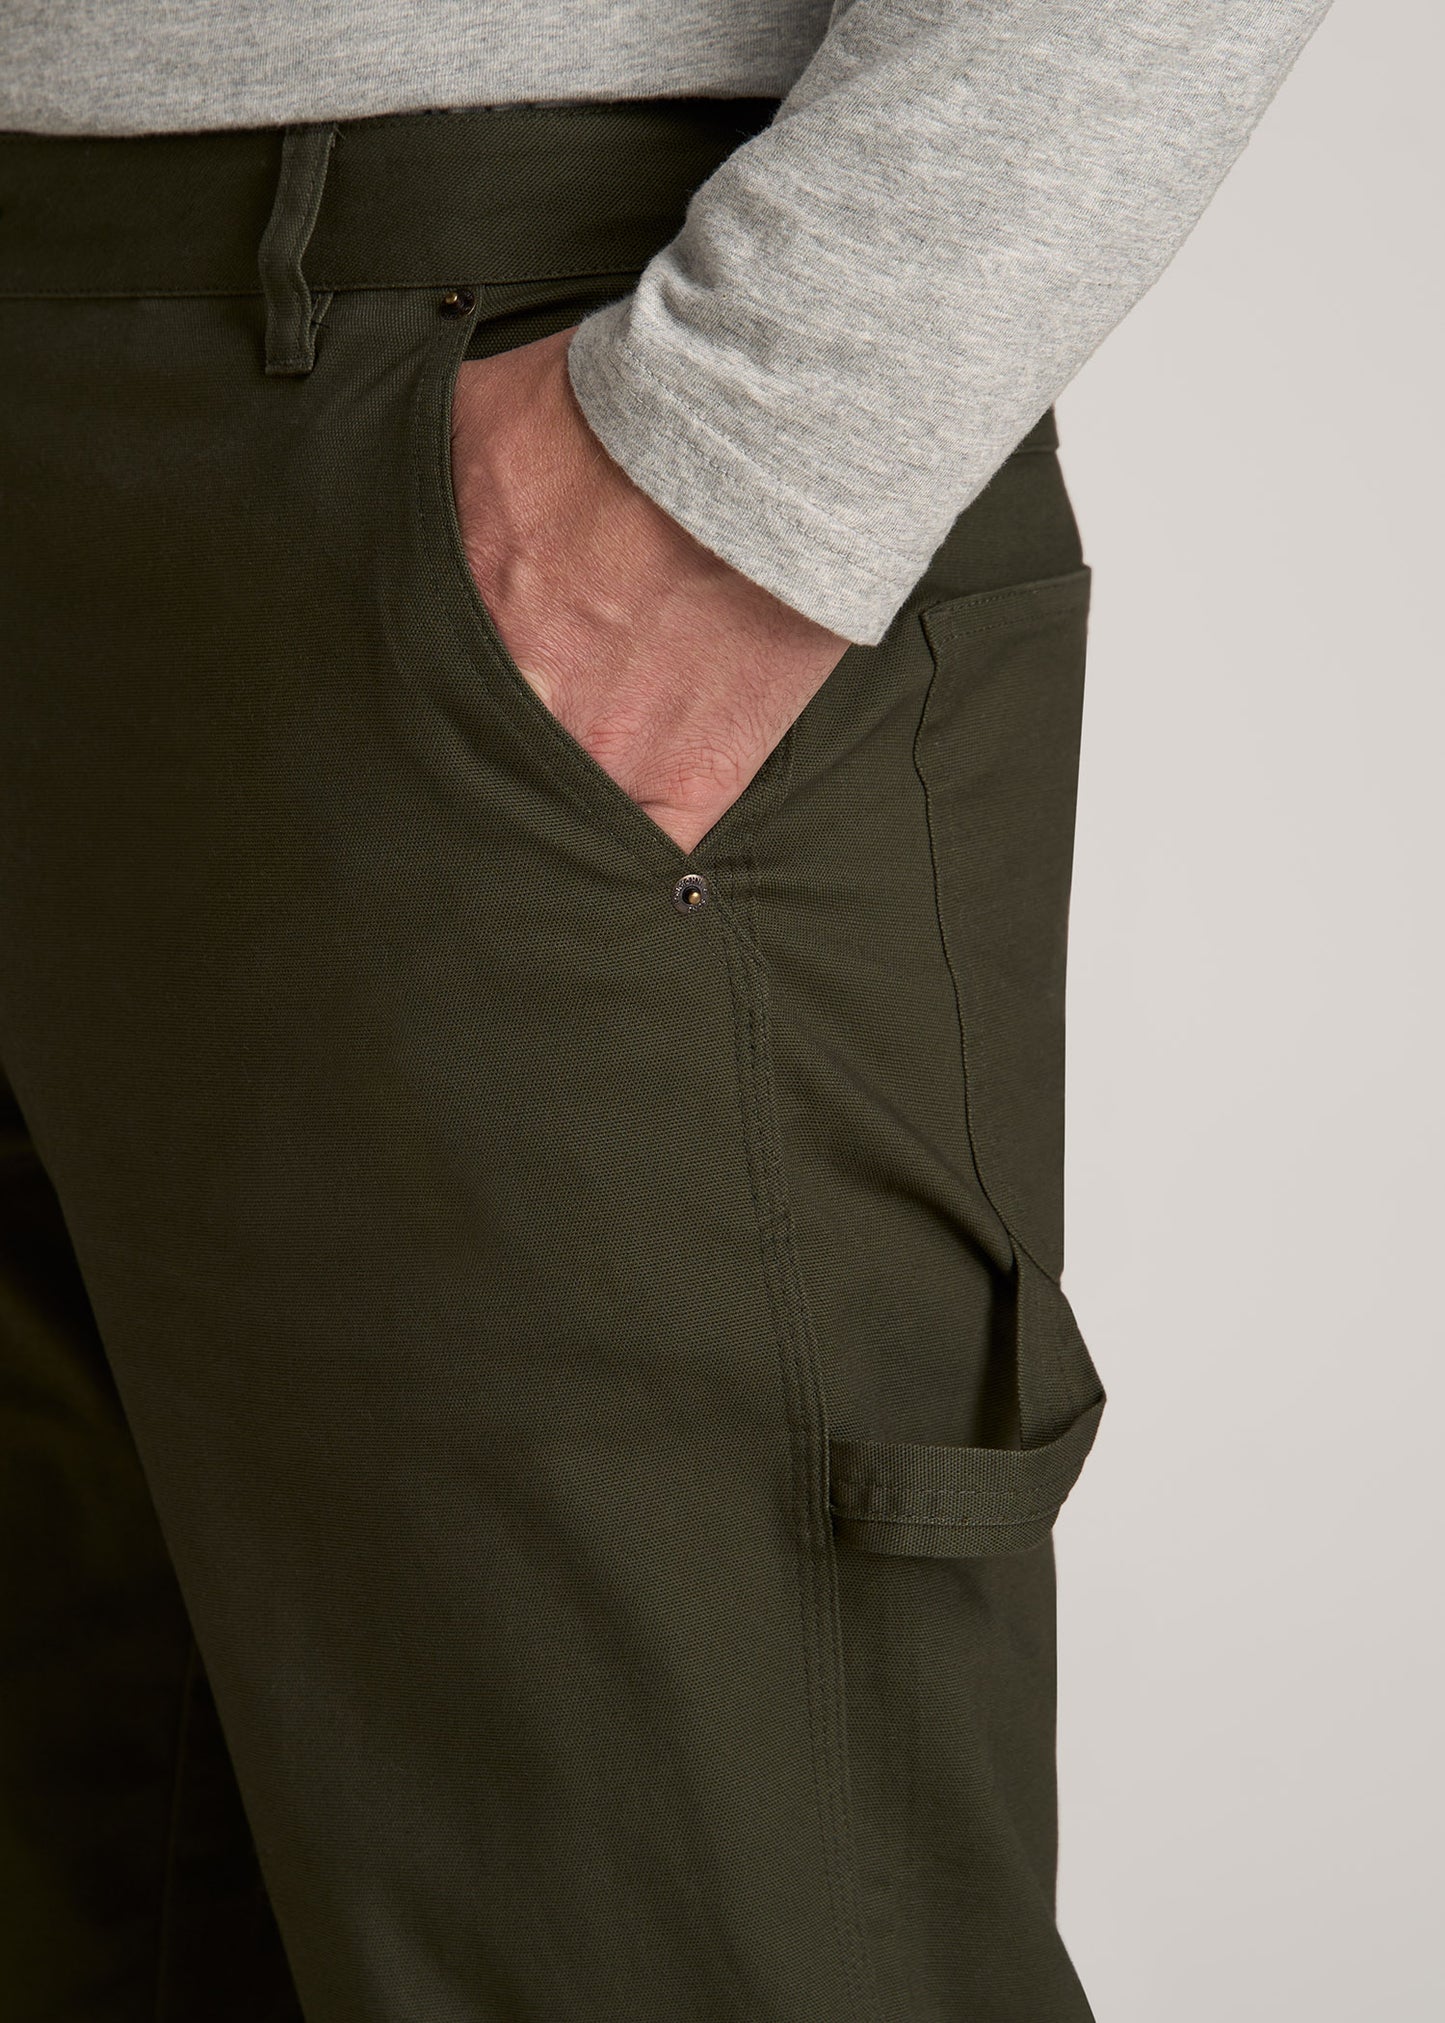 LJ&S Stretch Canvas REGULAR-FIT Carpenter’s Pants for Tall Men in Thyme Green